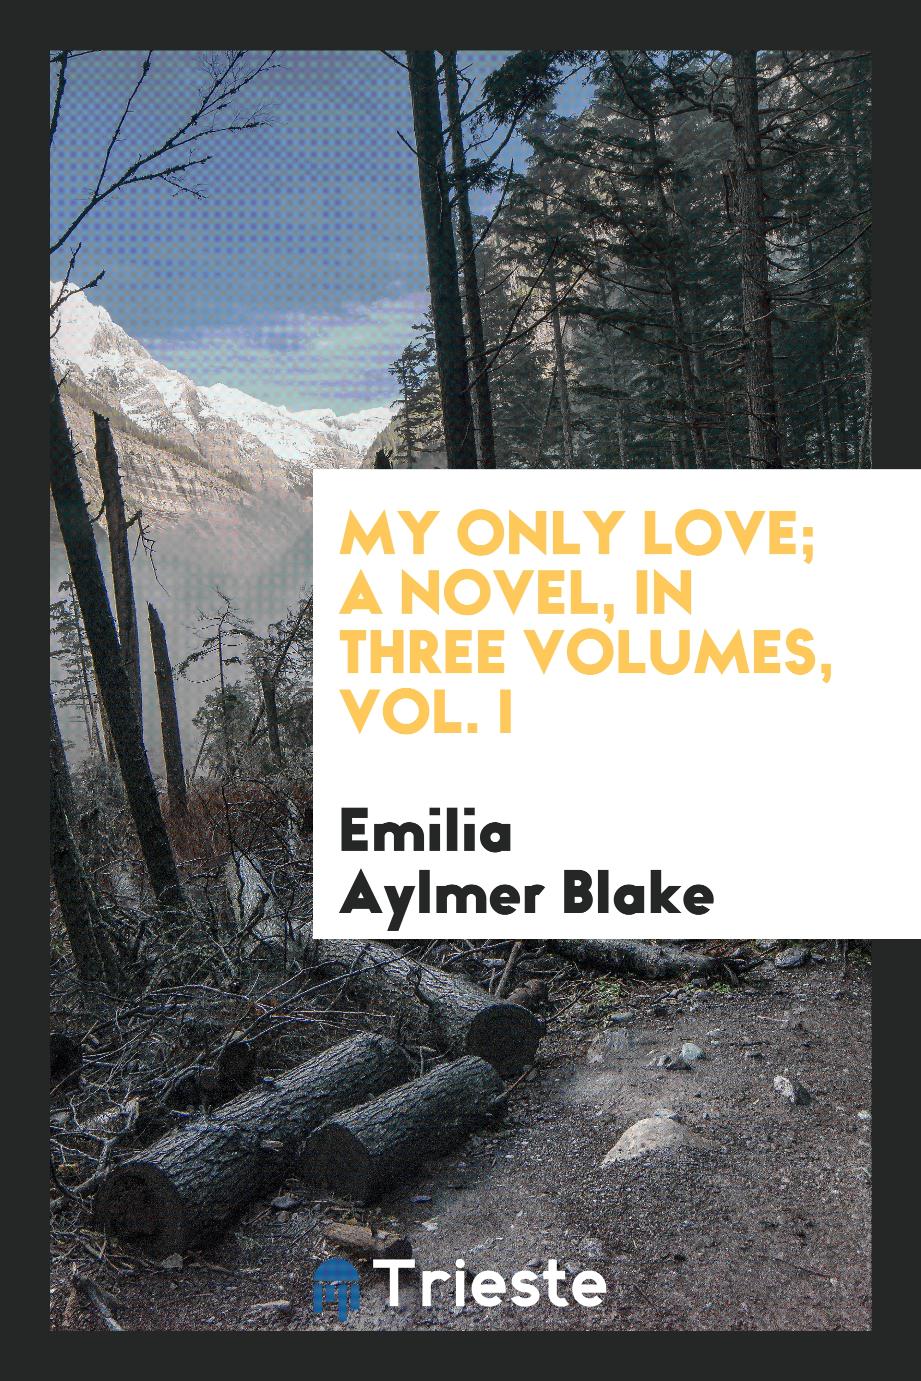 My only love; a novel, in three volumes, vol. I